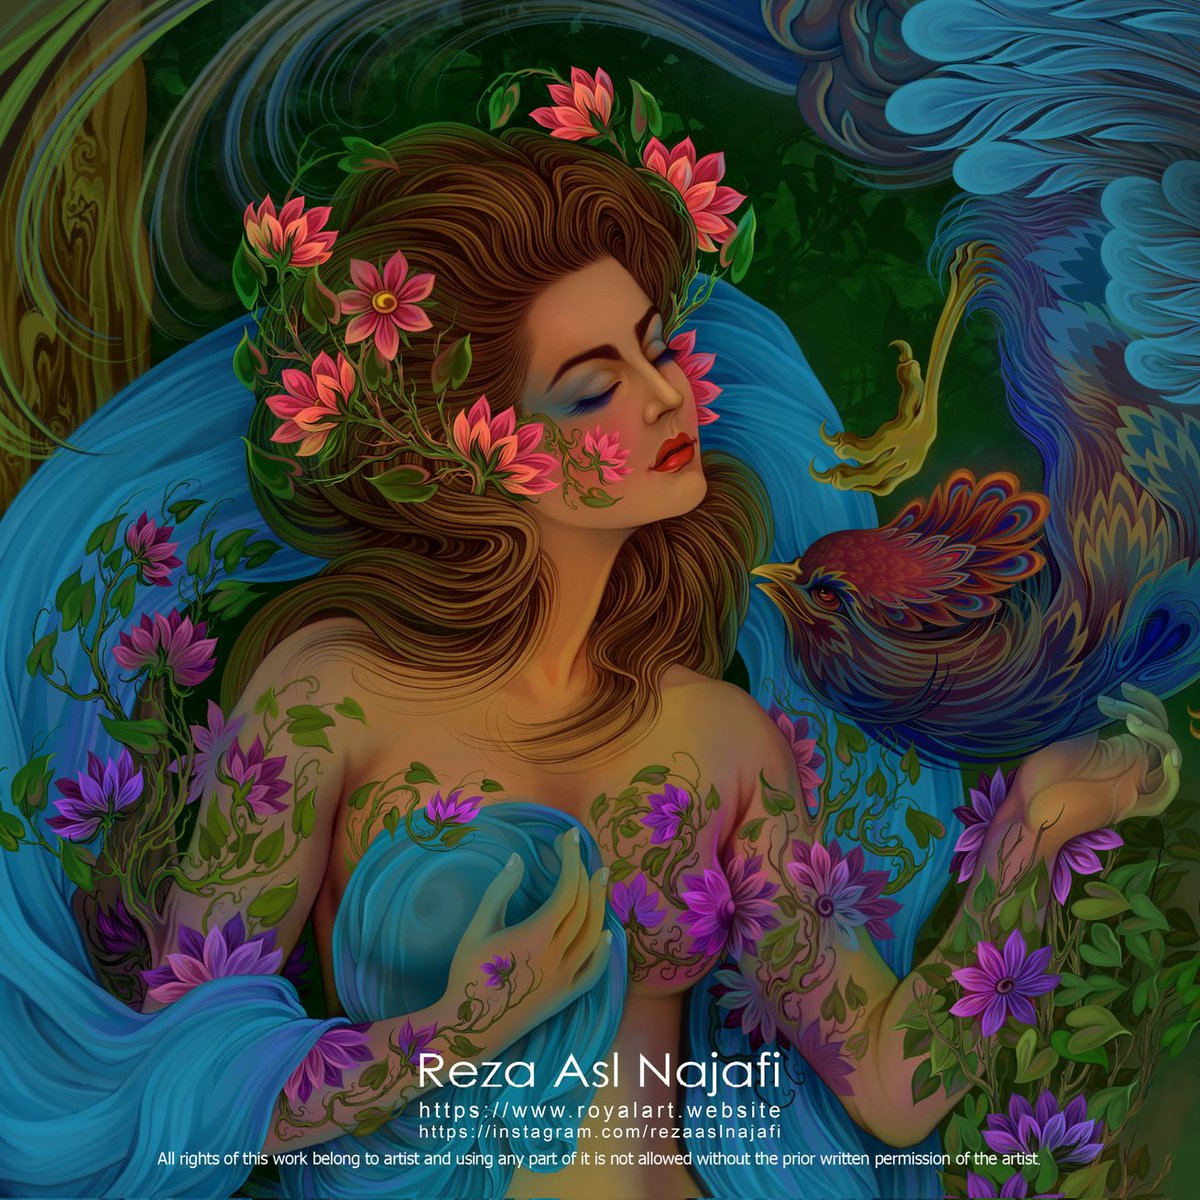 ☆ Part of the painting 'Place of grow love' 2022
Created by Reza Asl Najafi
Technique: Digital painting
Size: 86.12x118.11 Inches, 5GB

royalart.website

 #rezaaslnajafi #dubaiart
#masoumaarts #painting #digitalpainting #art #artist #NFTs #OpenSea #FoundationNFT